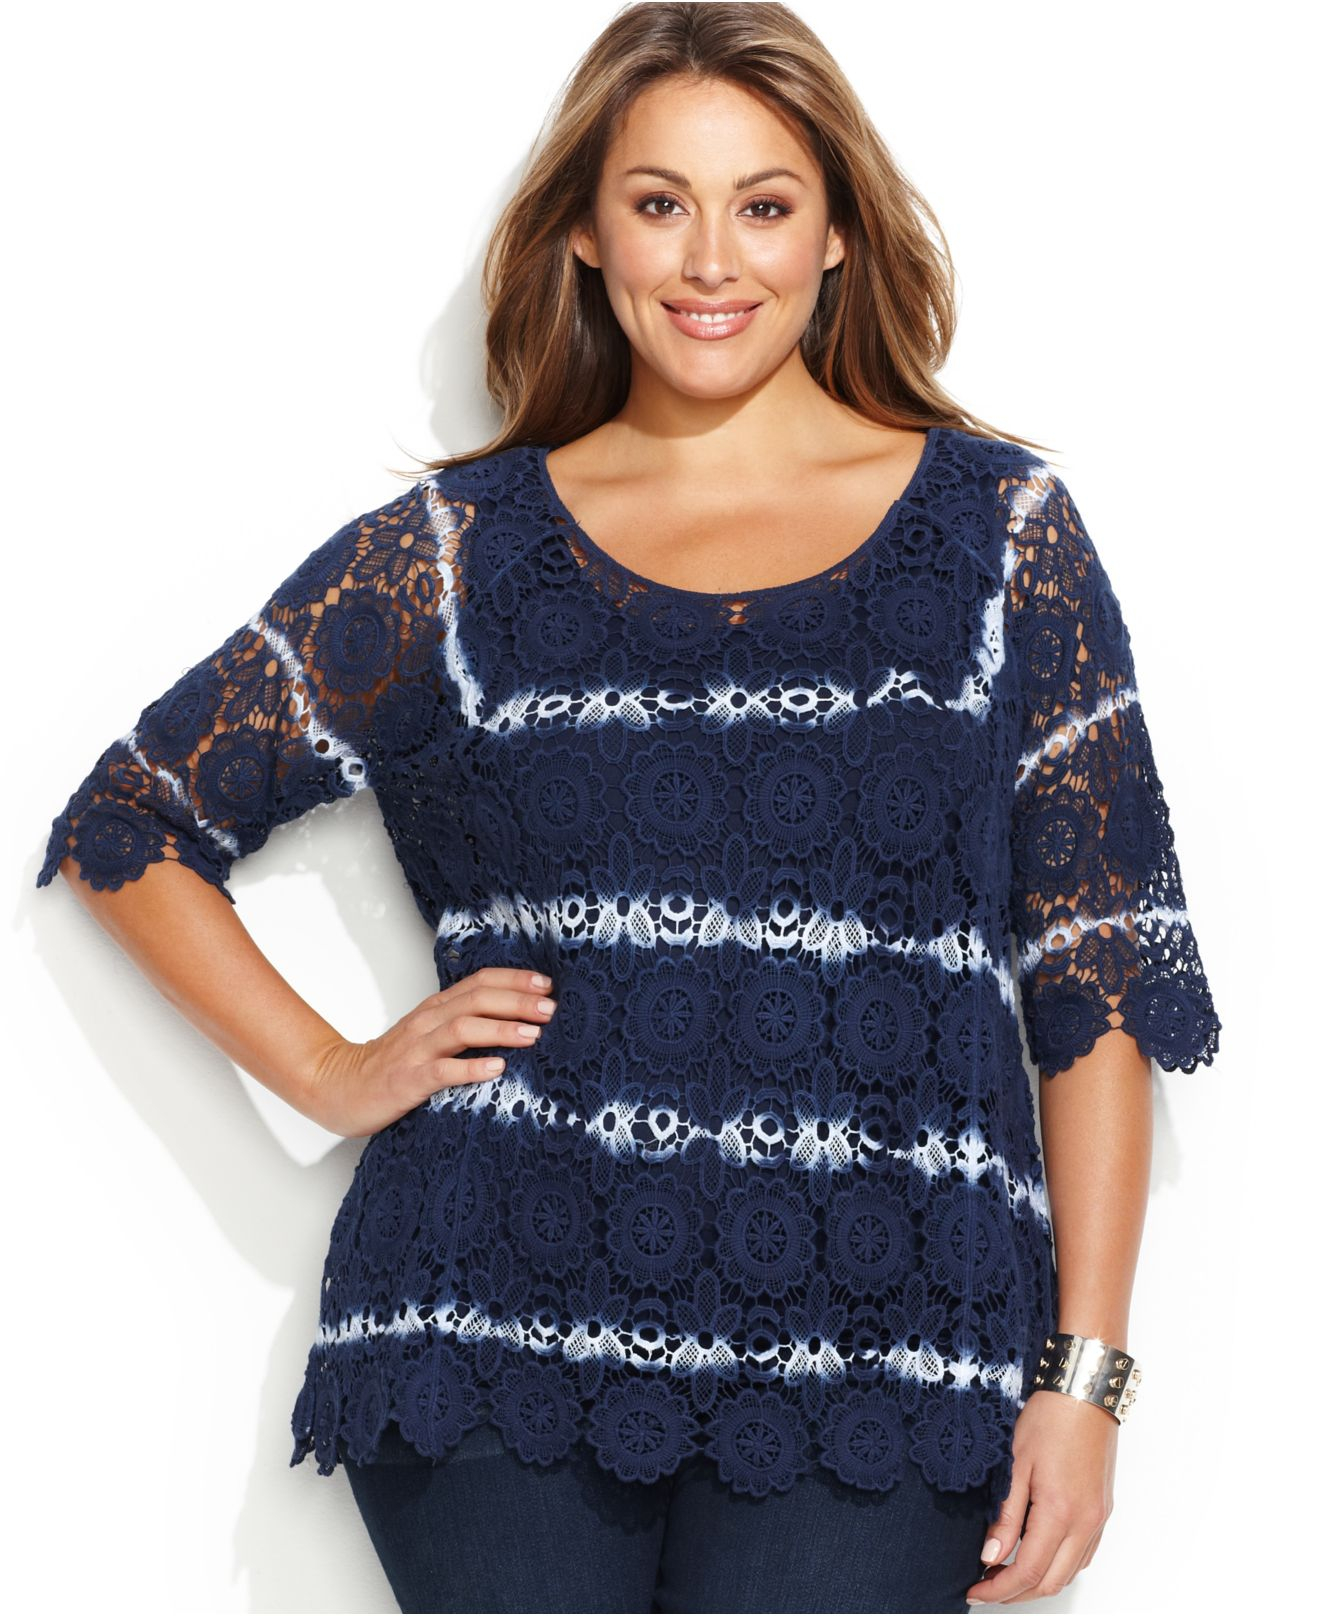 Lyst - Inc international concepts Plus Size Tie-dyed Crochet Sweater in ...